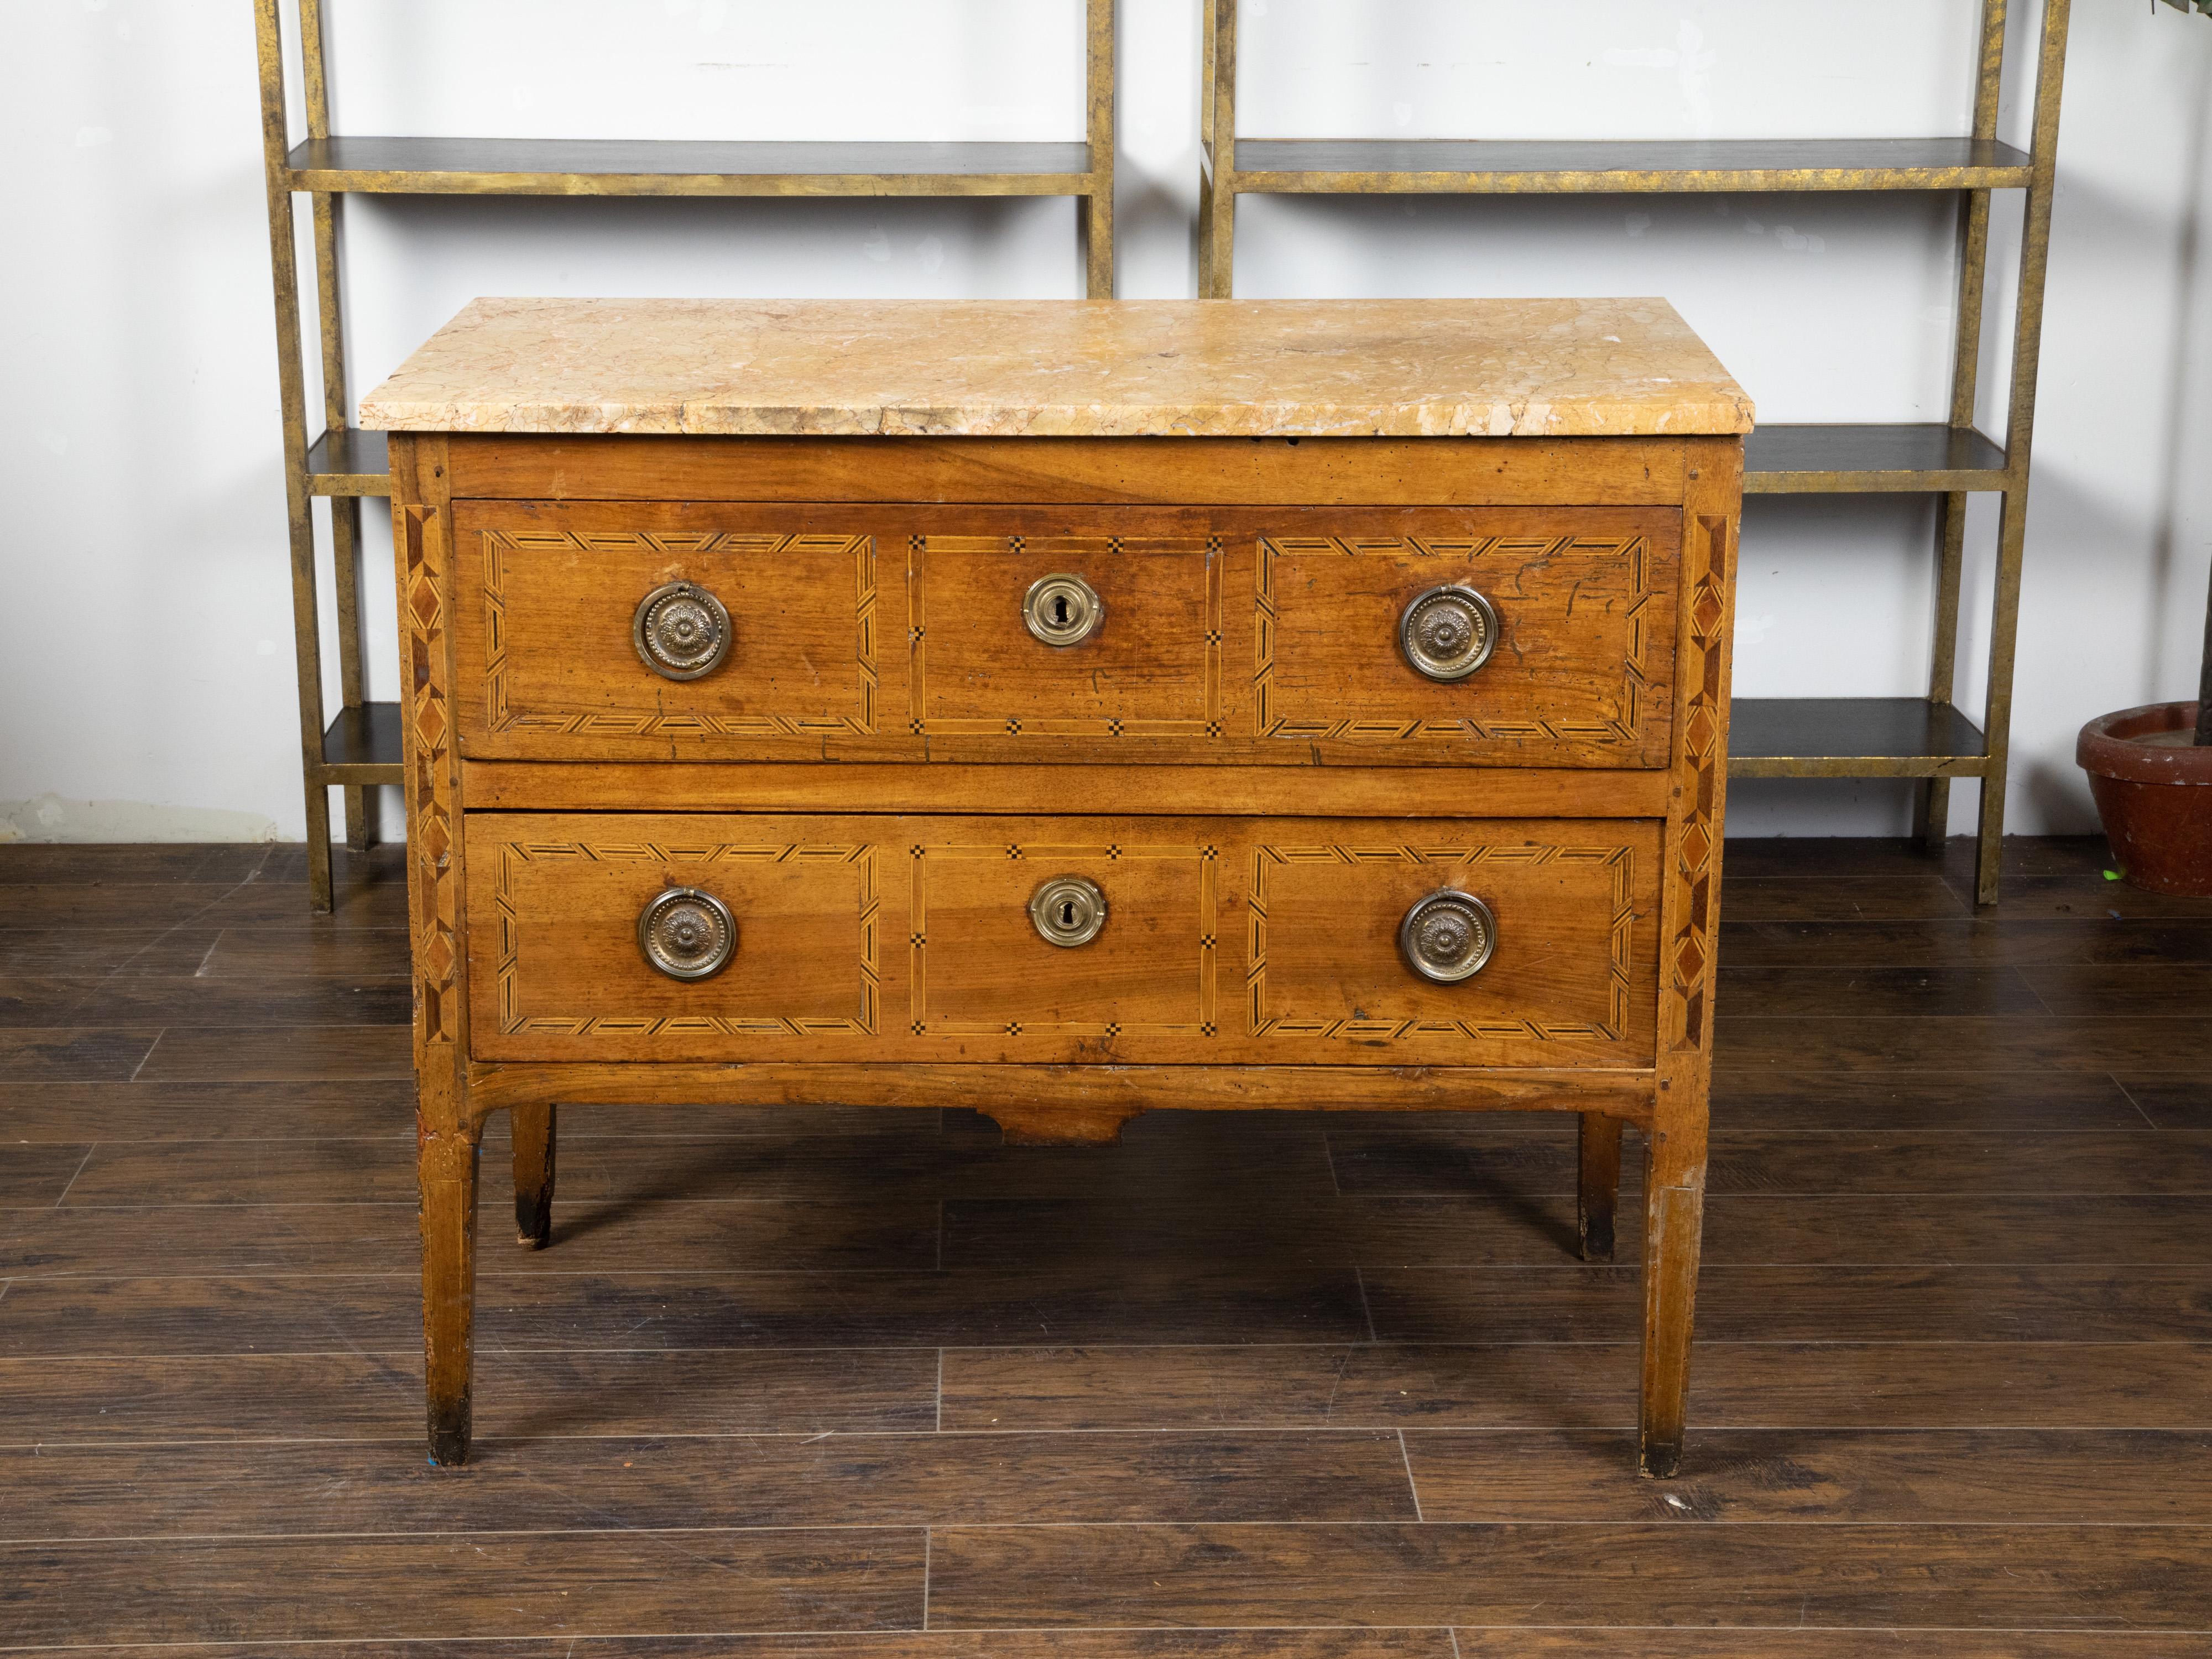 An Italian walnut commode from the early 19th century, with yellow marble top, two drawers and inlay. Created in Italy during the early years of the 19th century, this walnut commode features a rectangular yellow marble top sitting above two drawers